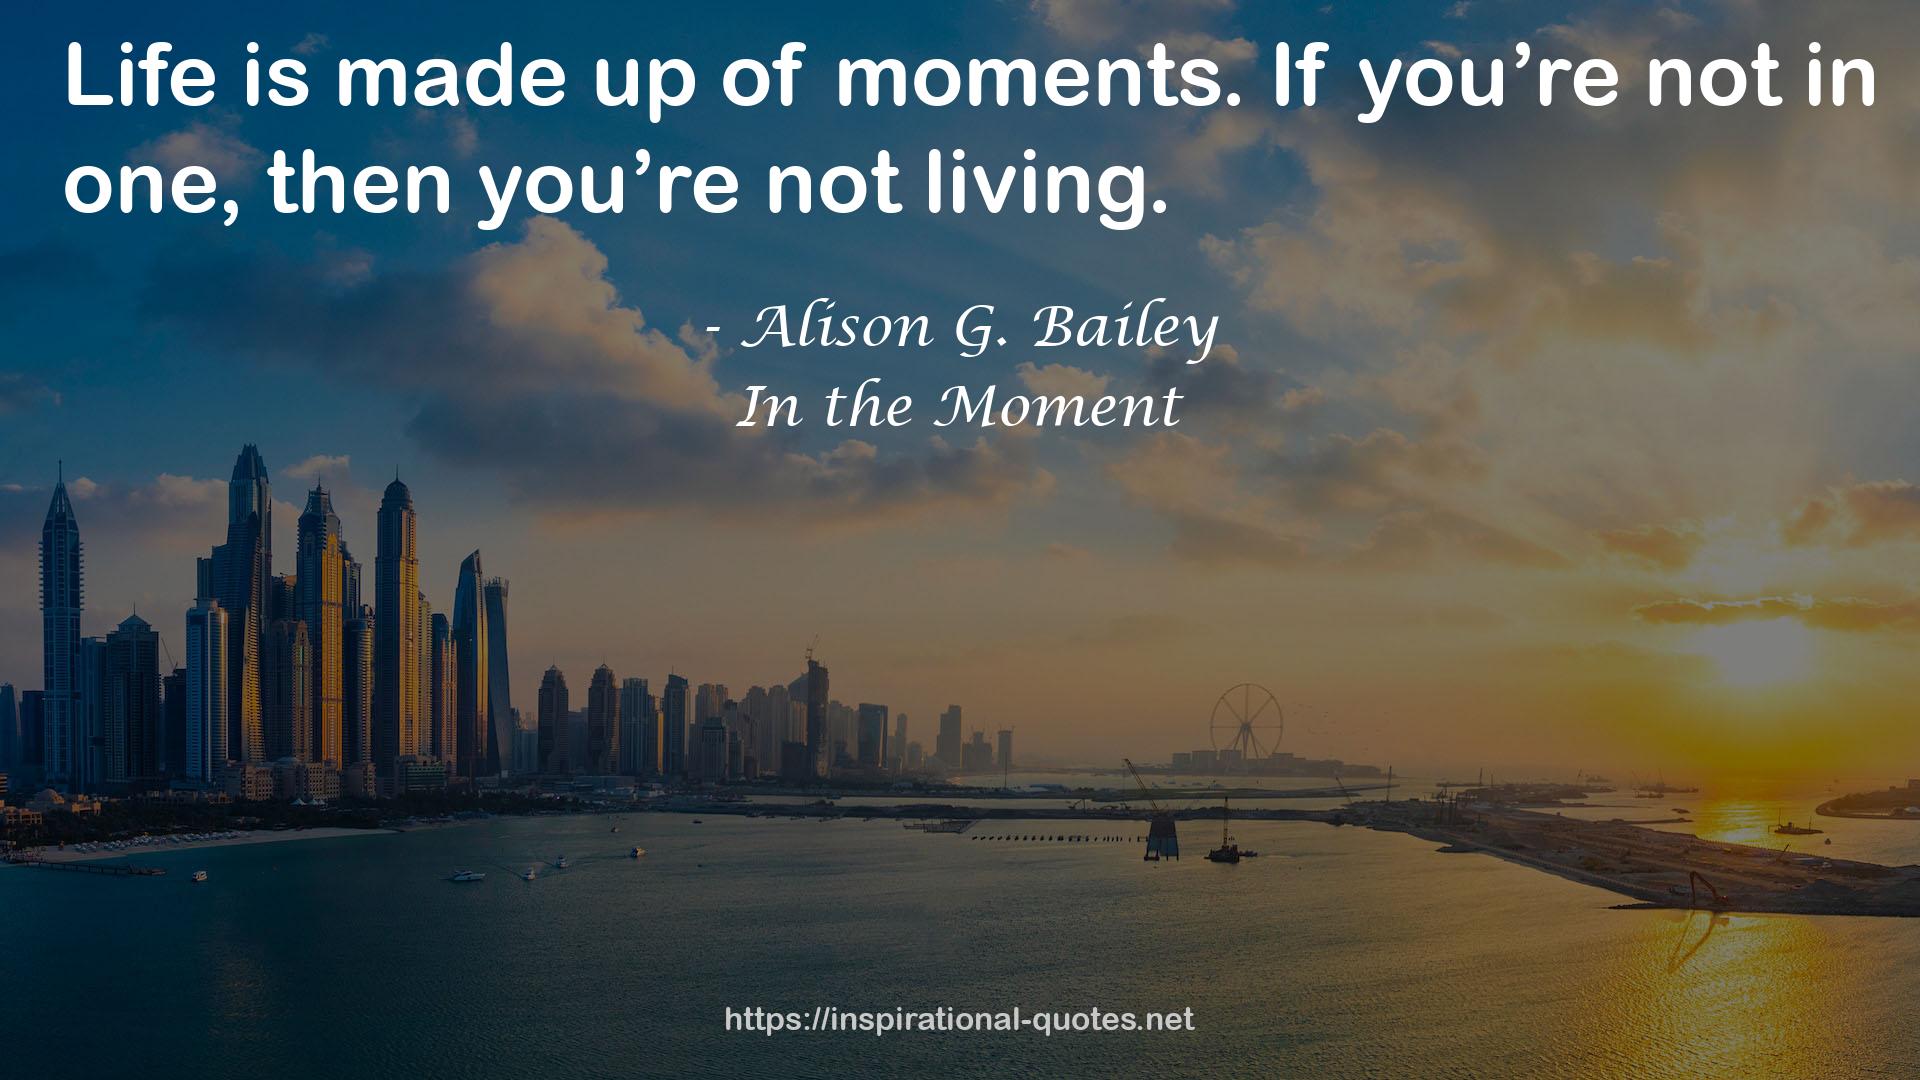 In the Moment QUOTES